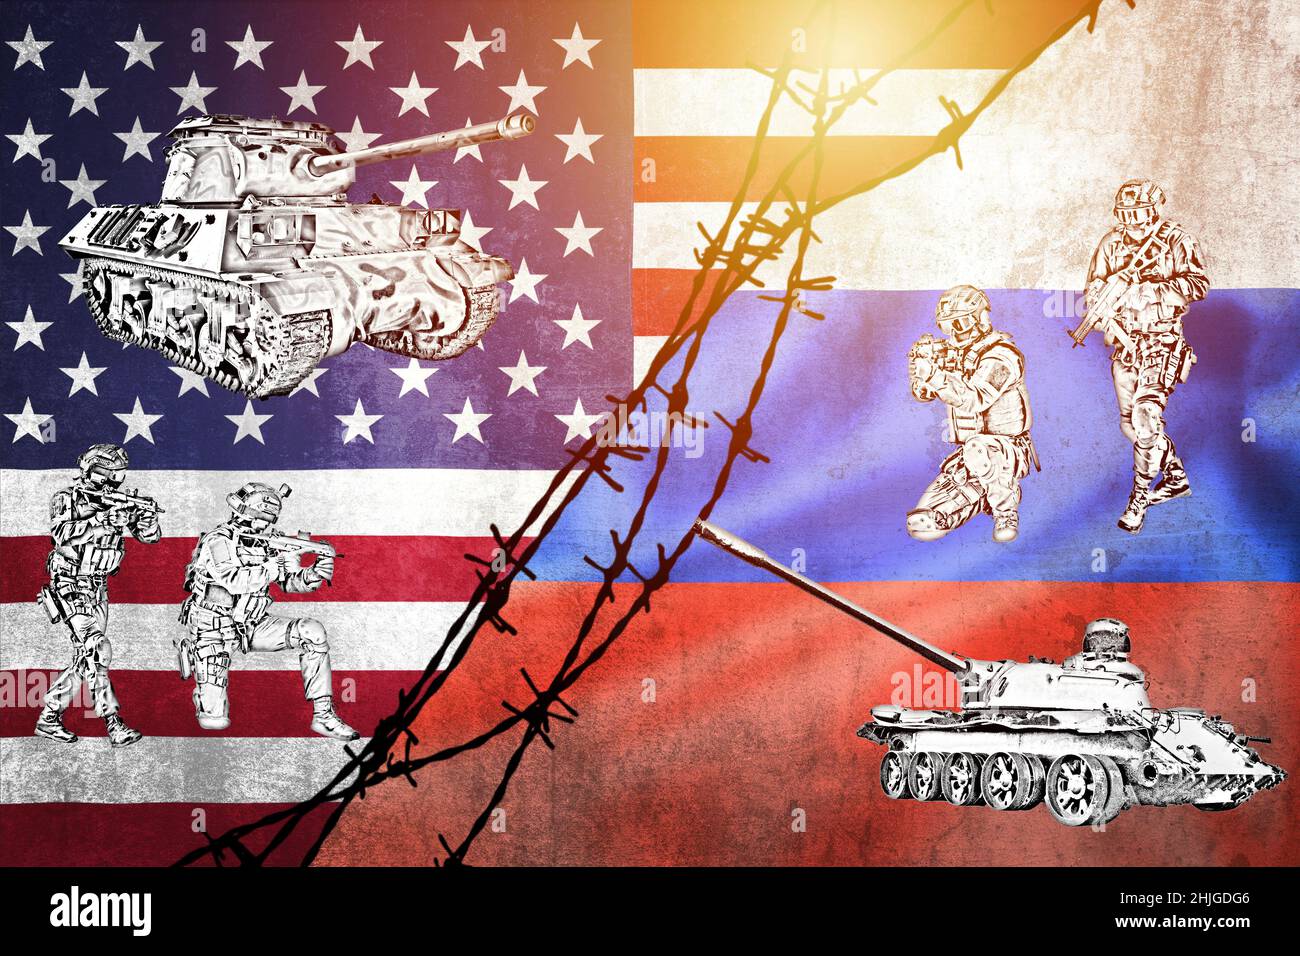 War games between Russia and USA on flags divided by barb wire illustration, pointing at each other, concept of tense relations between west and Russi Stock Photo